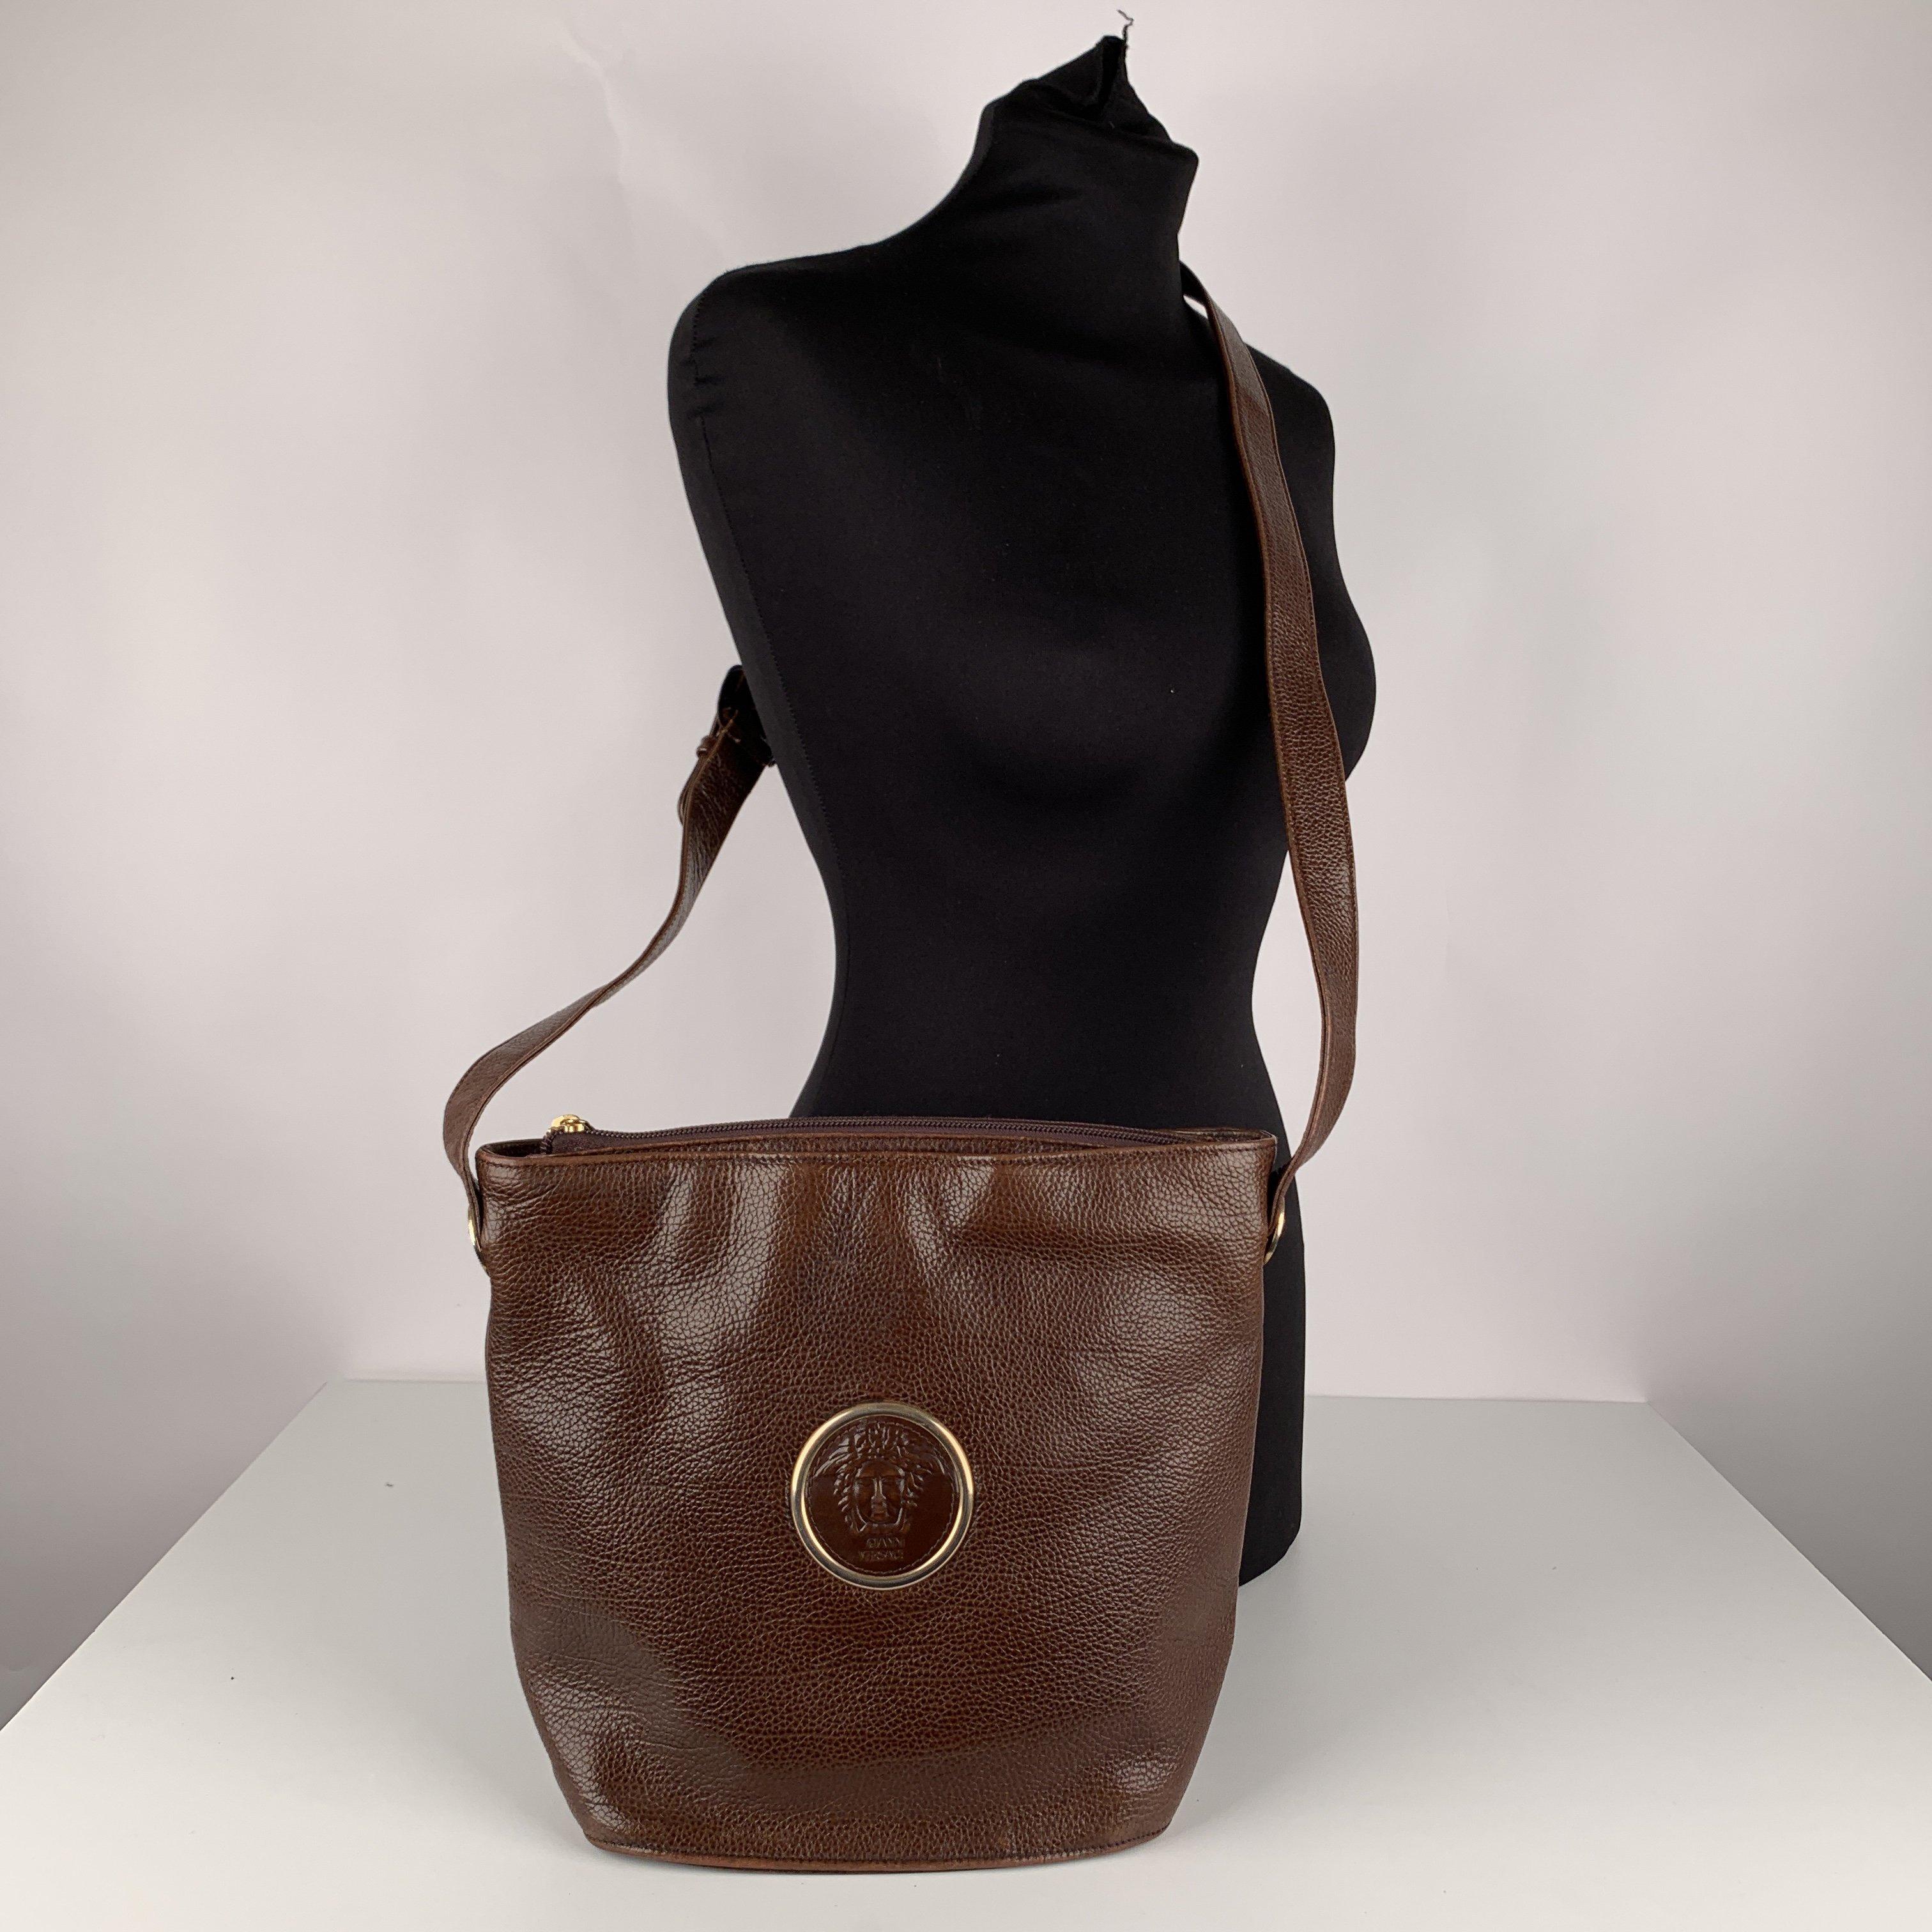 MATERIAL: Leather COLOR: Brown MODEL: Shoulder bag GENDER: Women SIZE: Medium Condition CONDITION DETAILS: B :GOOD CONDITION - Some light wear of use - Some scratches on leather due to normal use, some wear of use on the bottom edges. Measurements